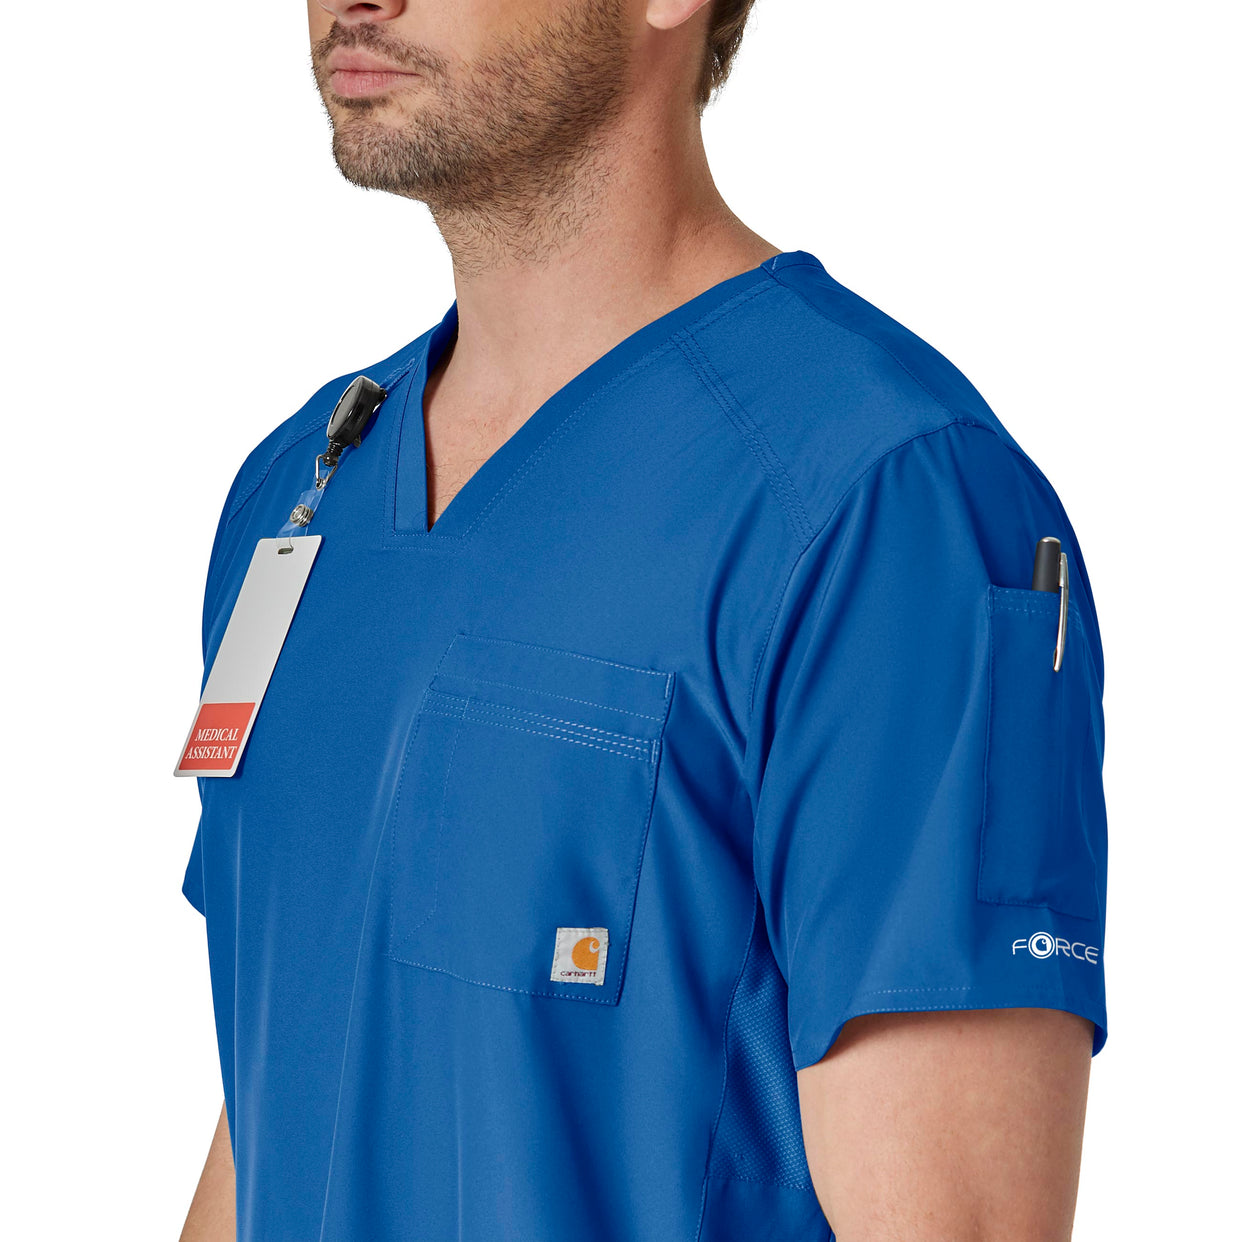 Force Liberty Men's Twill Chest Pocket Scrub Top Royal side view